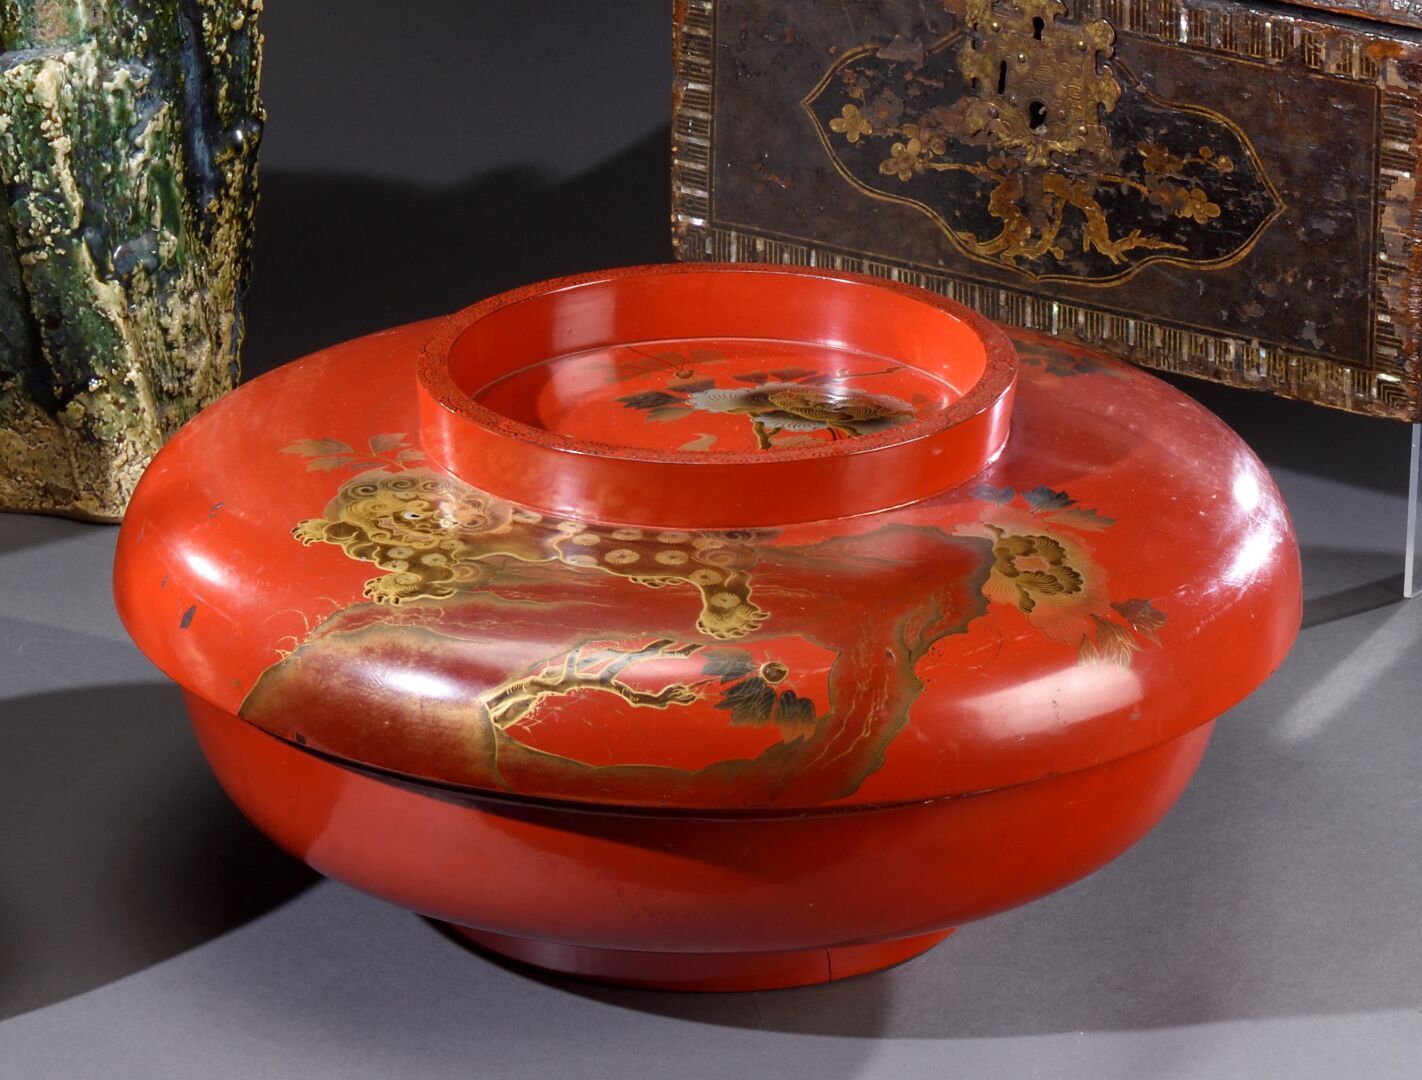 Null JAPAN - MEIJI period (1868-1912) 

Very large rice bowl in red lacquered wo&hellip;